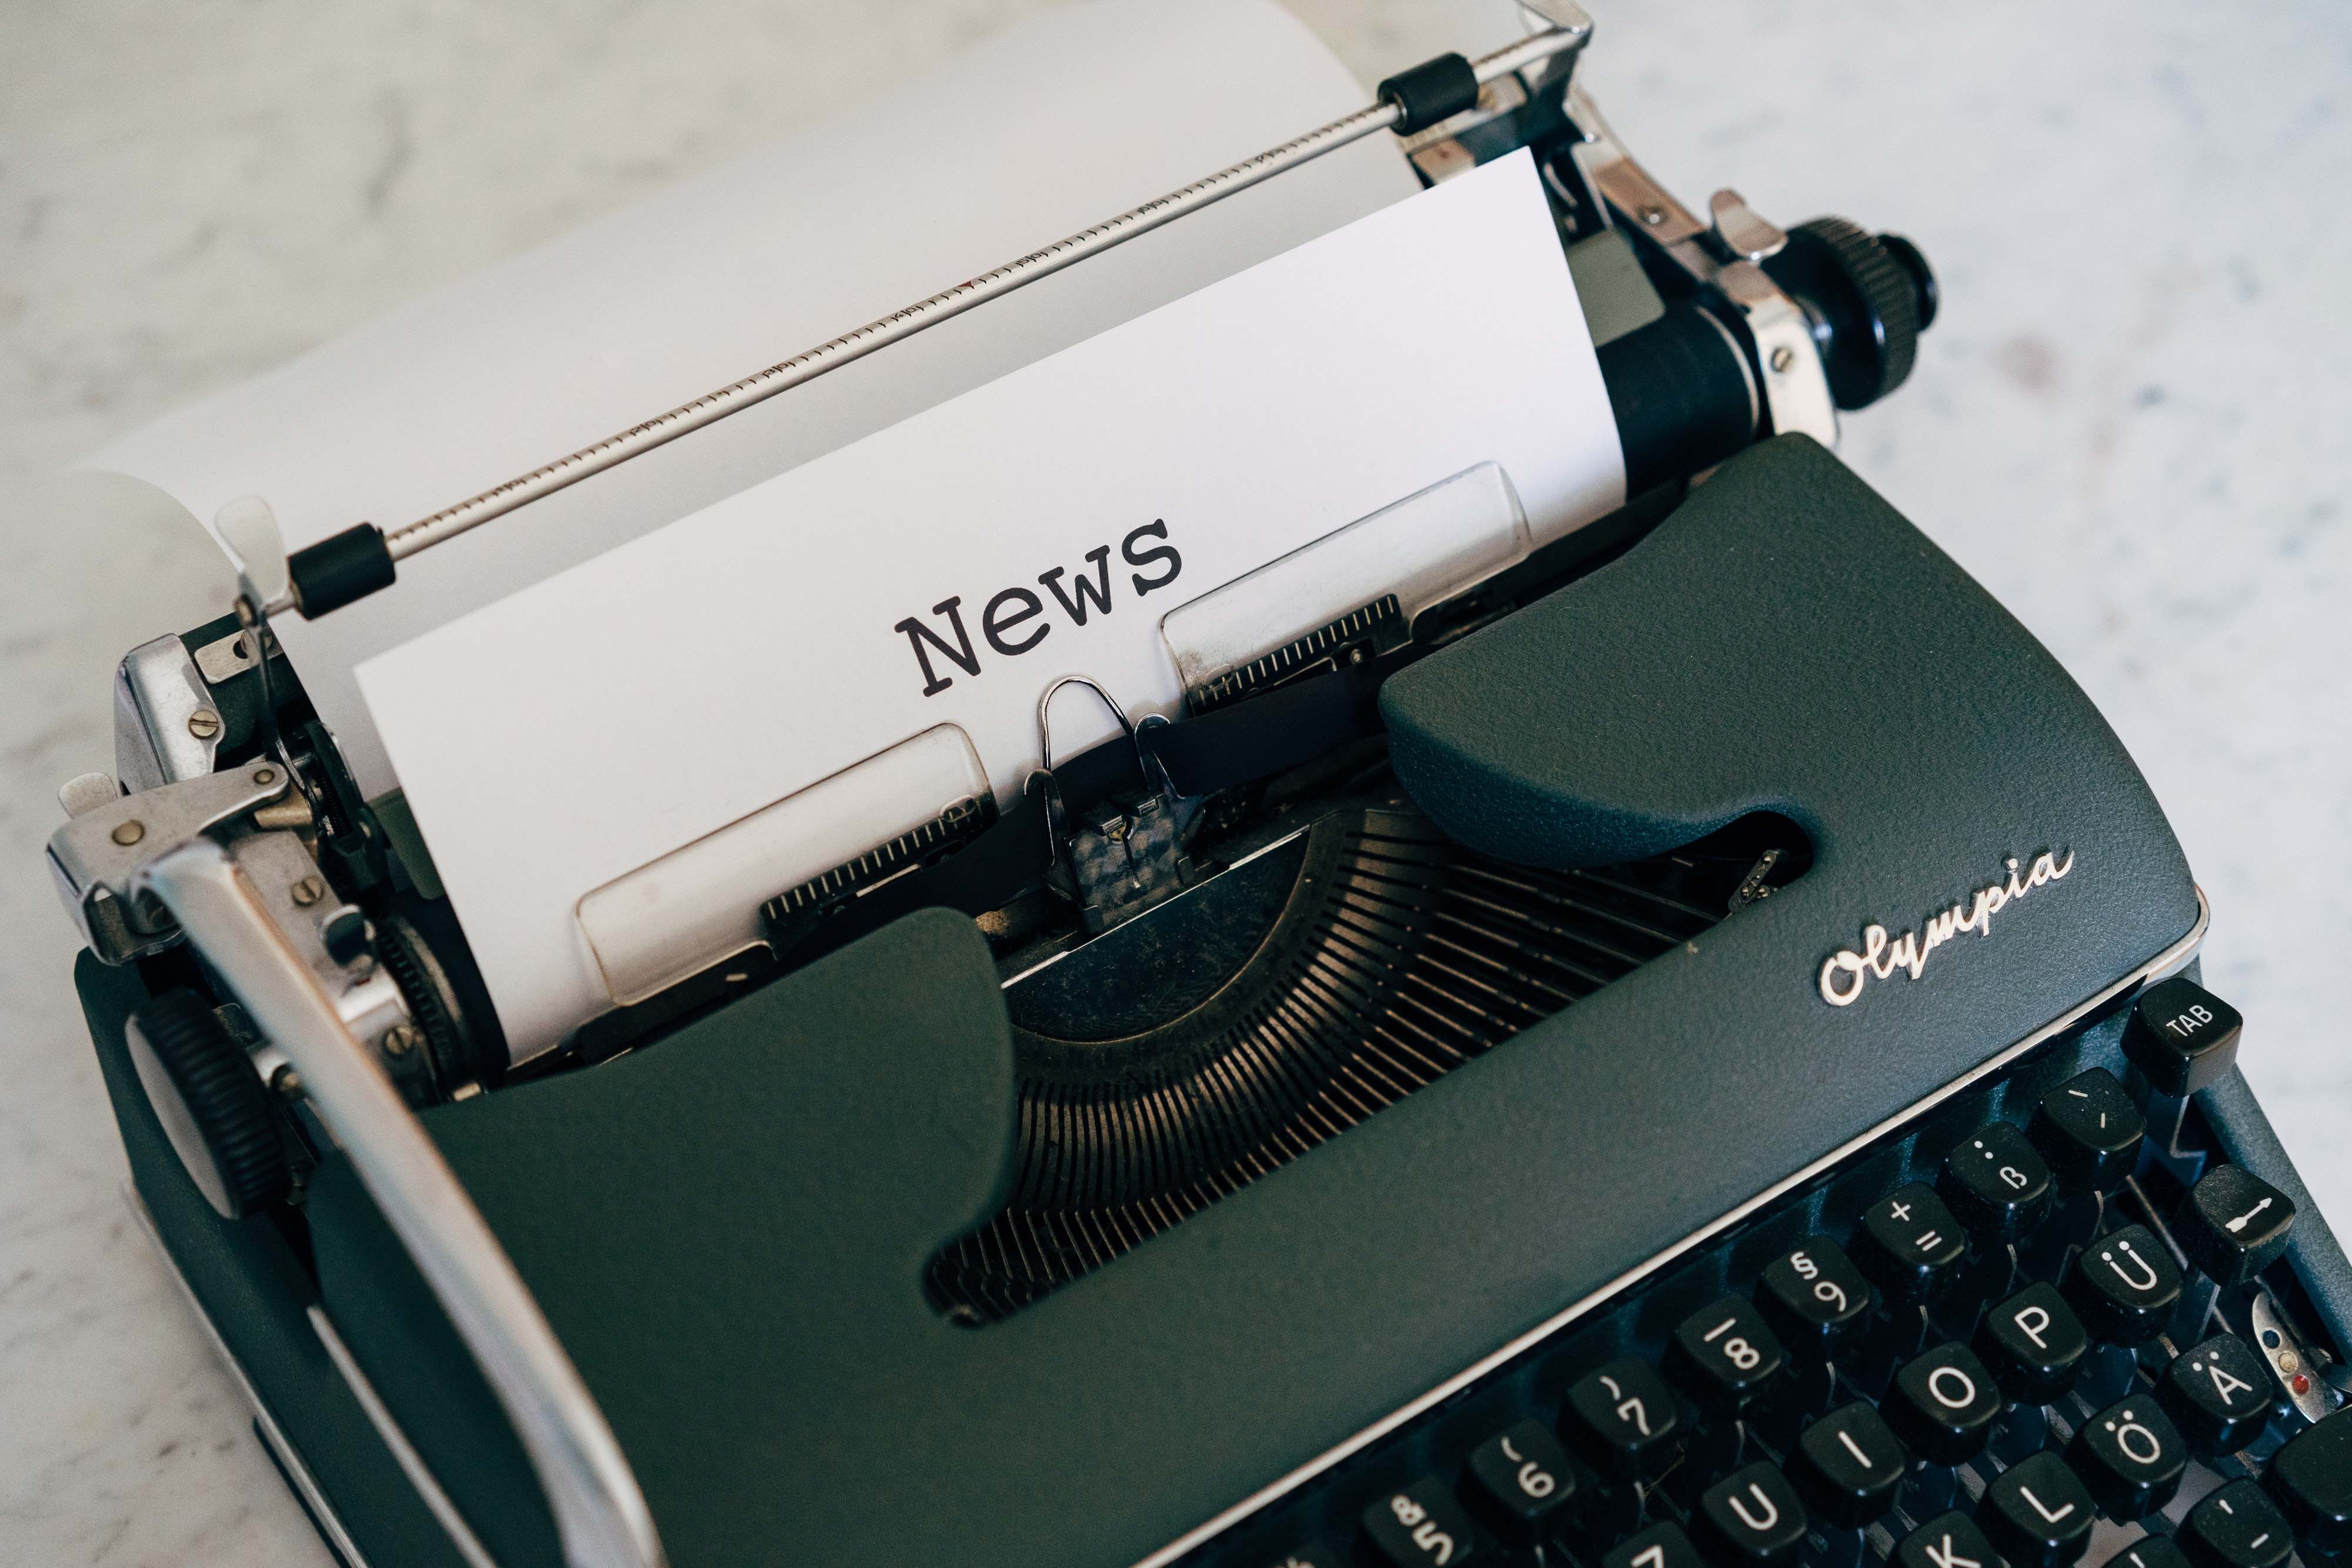 No News for Your Startup? Here’s How to Get Media Coverage Anyway